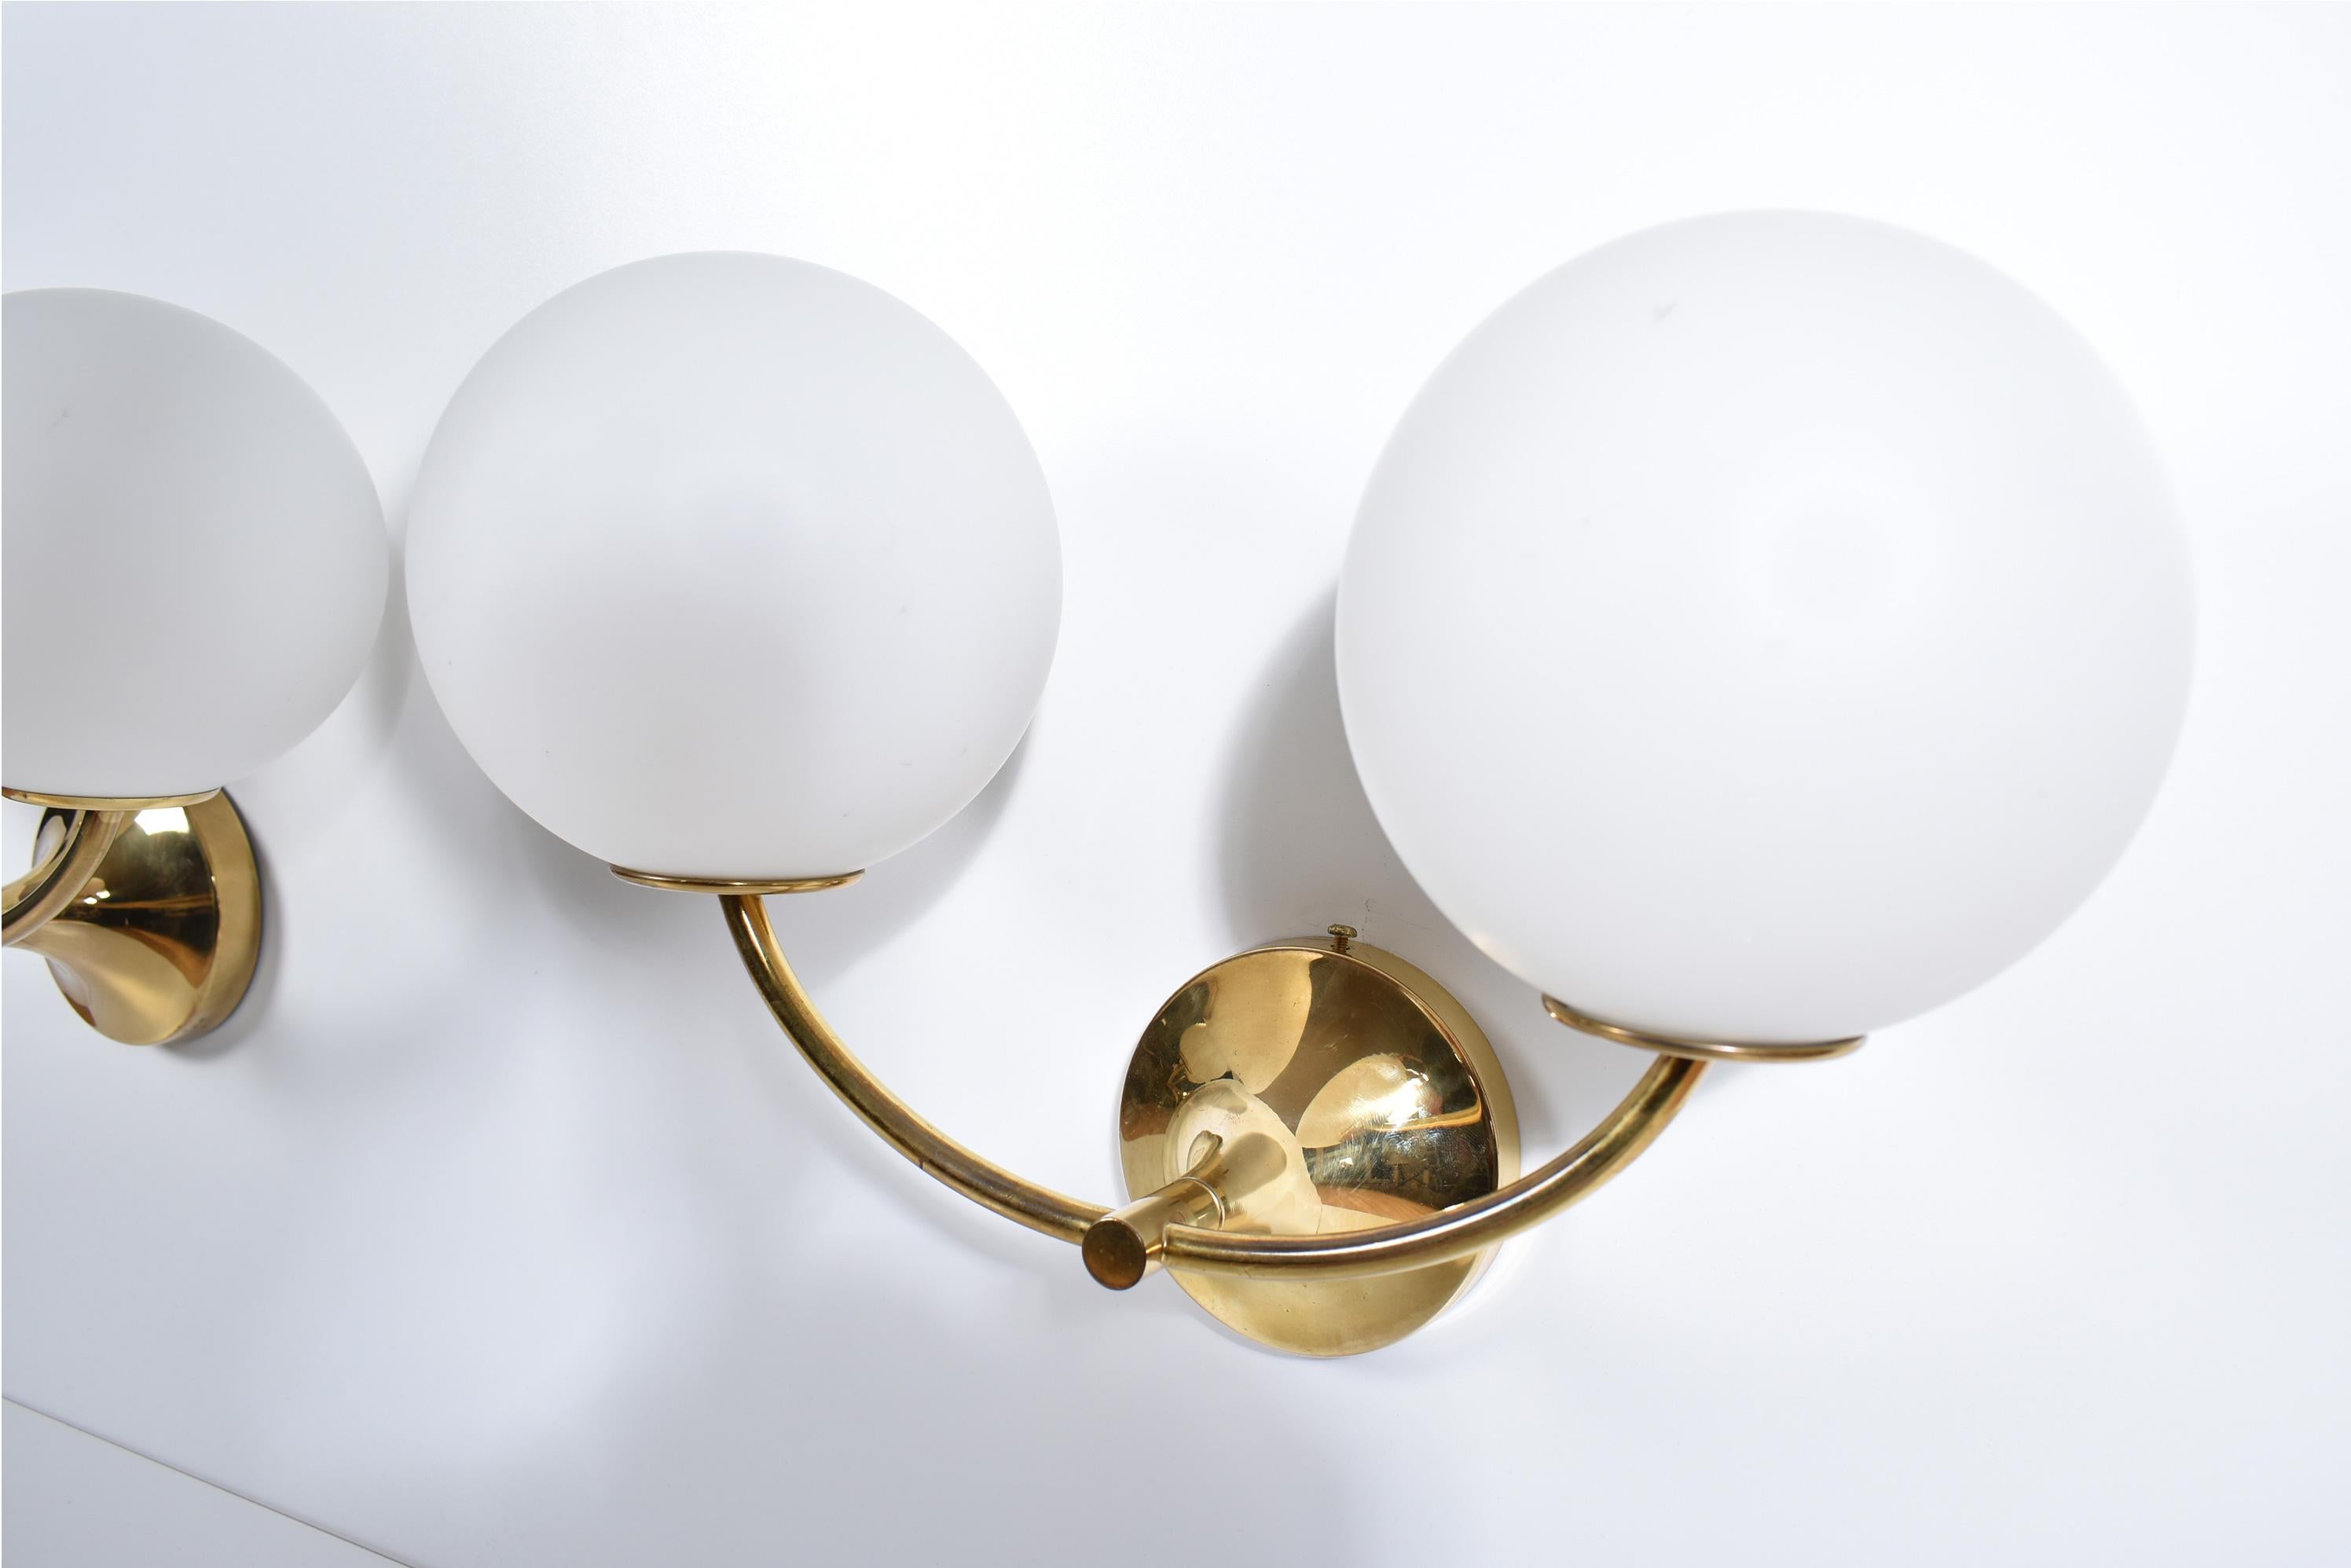 Swiss Brass Wall lights With Globes, Max Bill / E.R. Nele for Temde, Set of Four, 1960